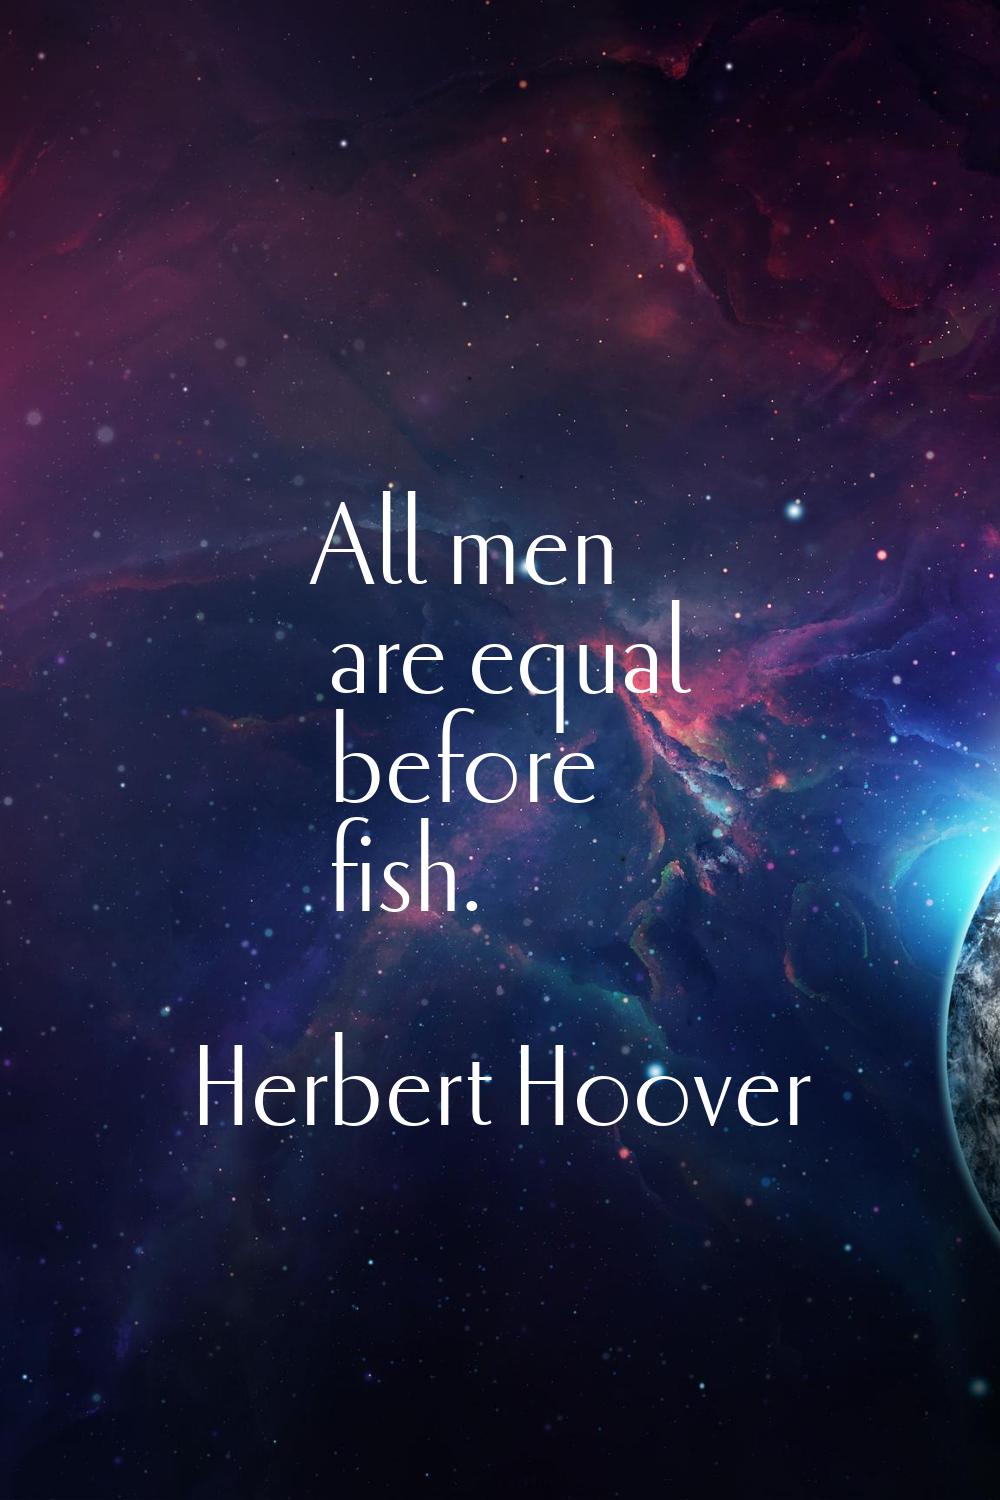 All men are equal before fish.